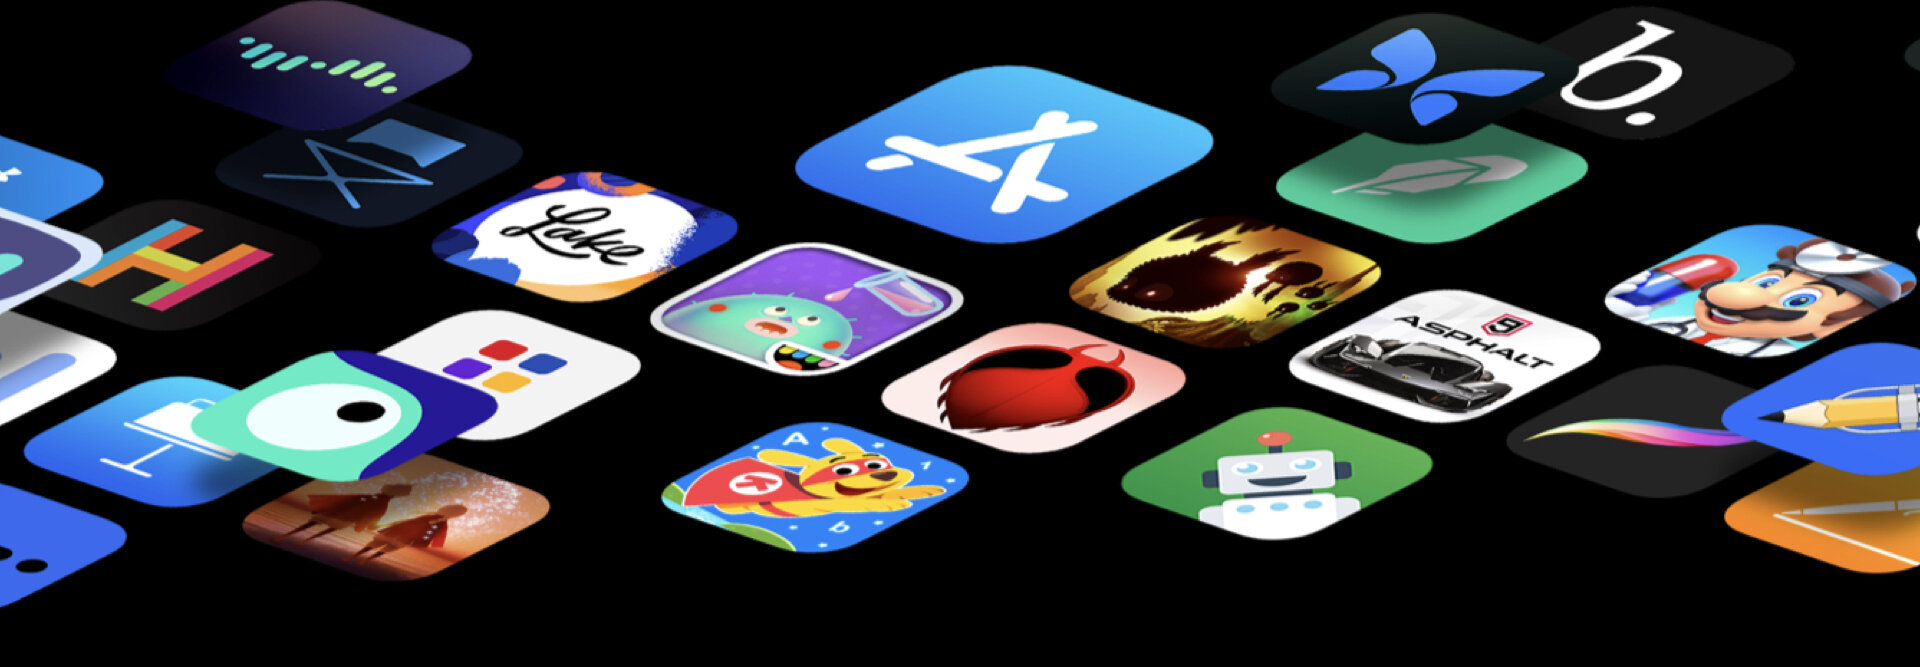  Apps Education's background image'